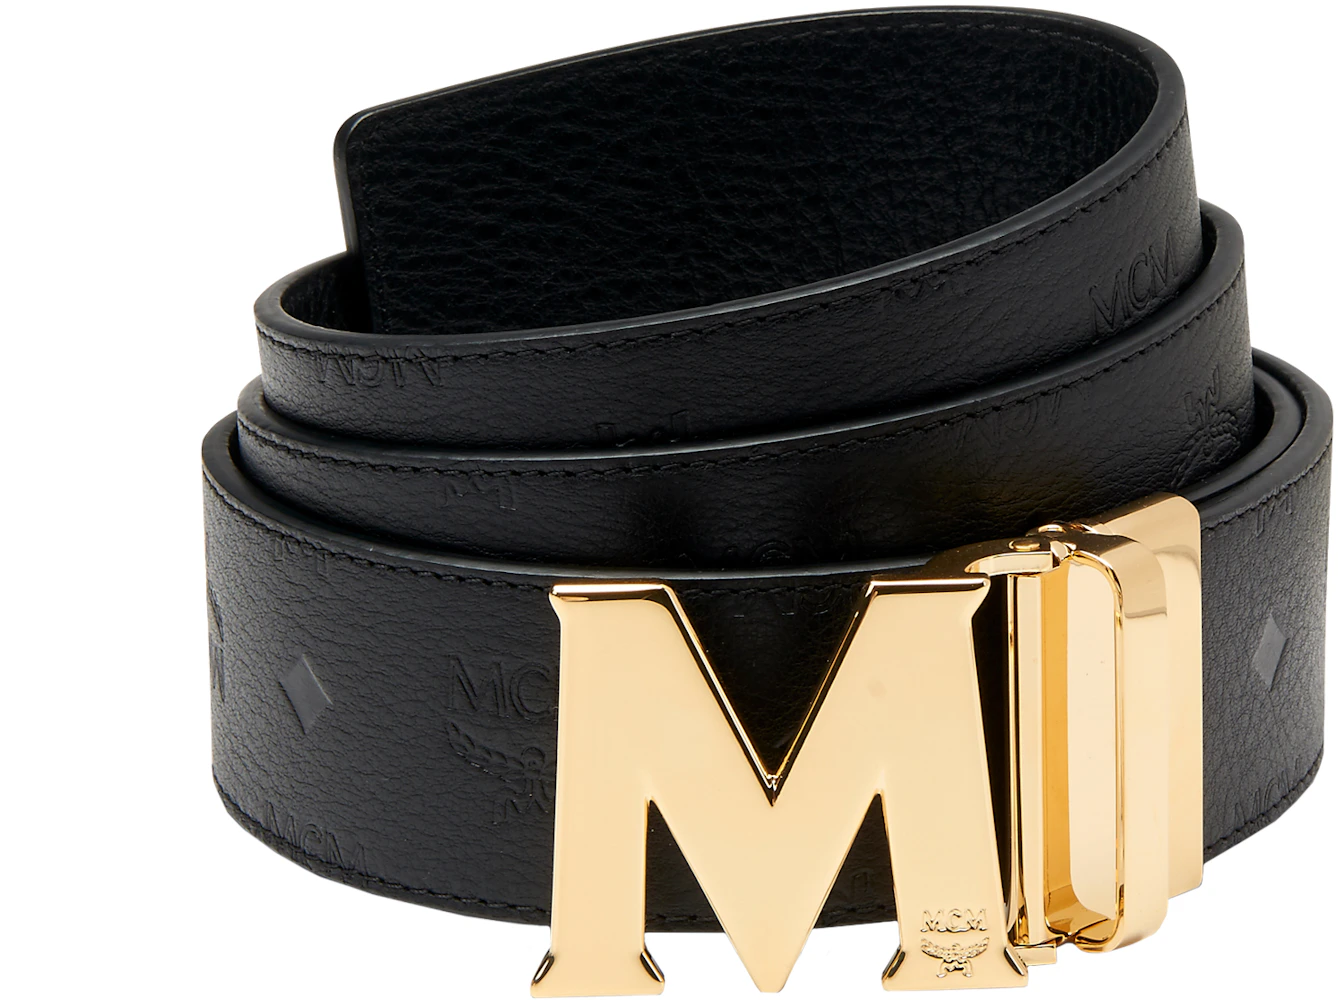 Authentic Adjustable Reversible Red to Black MCM Belt with Gold Buckle One  Size